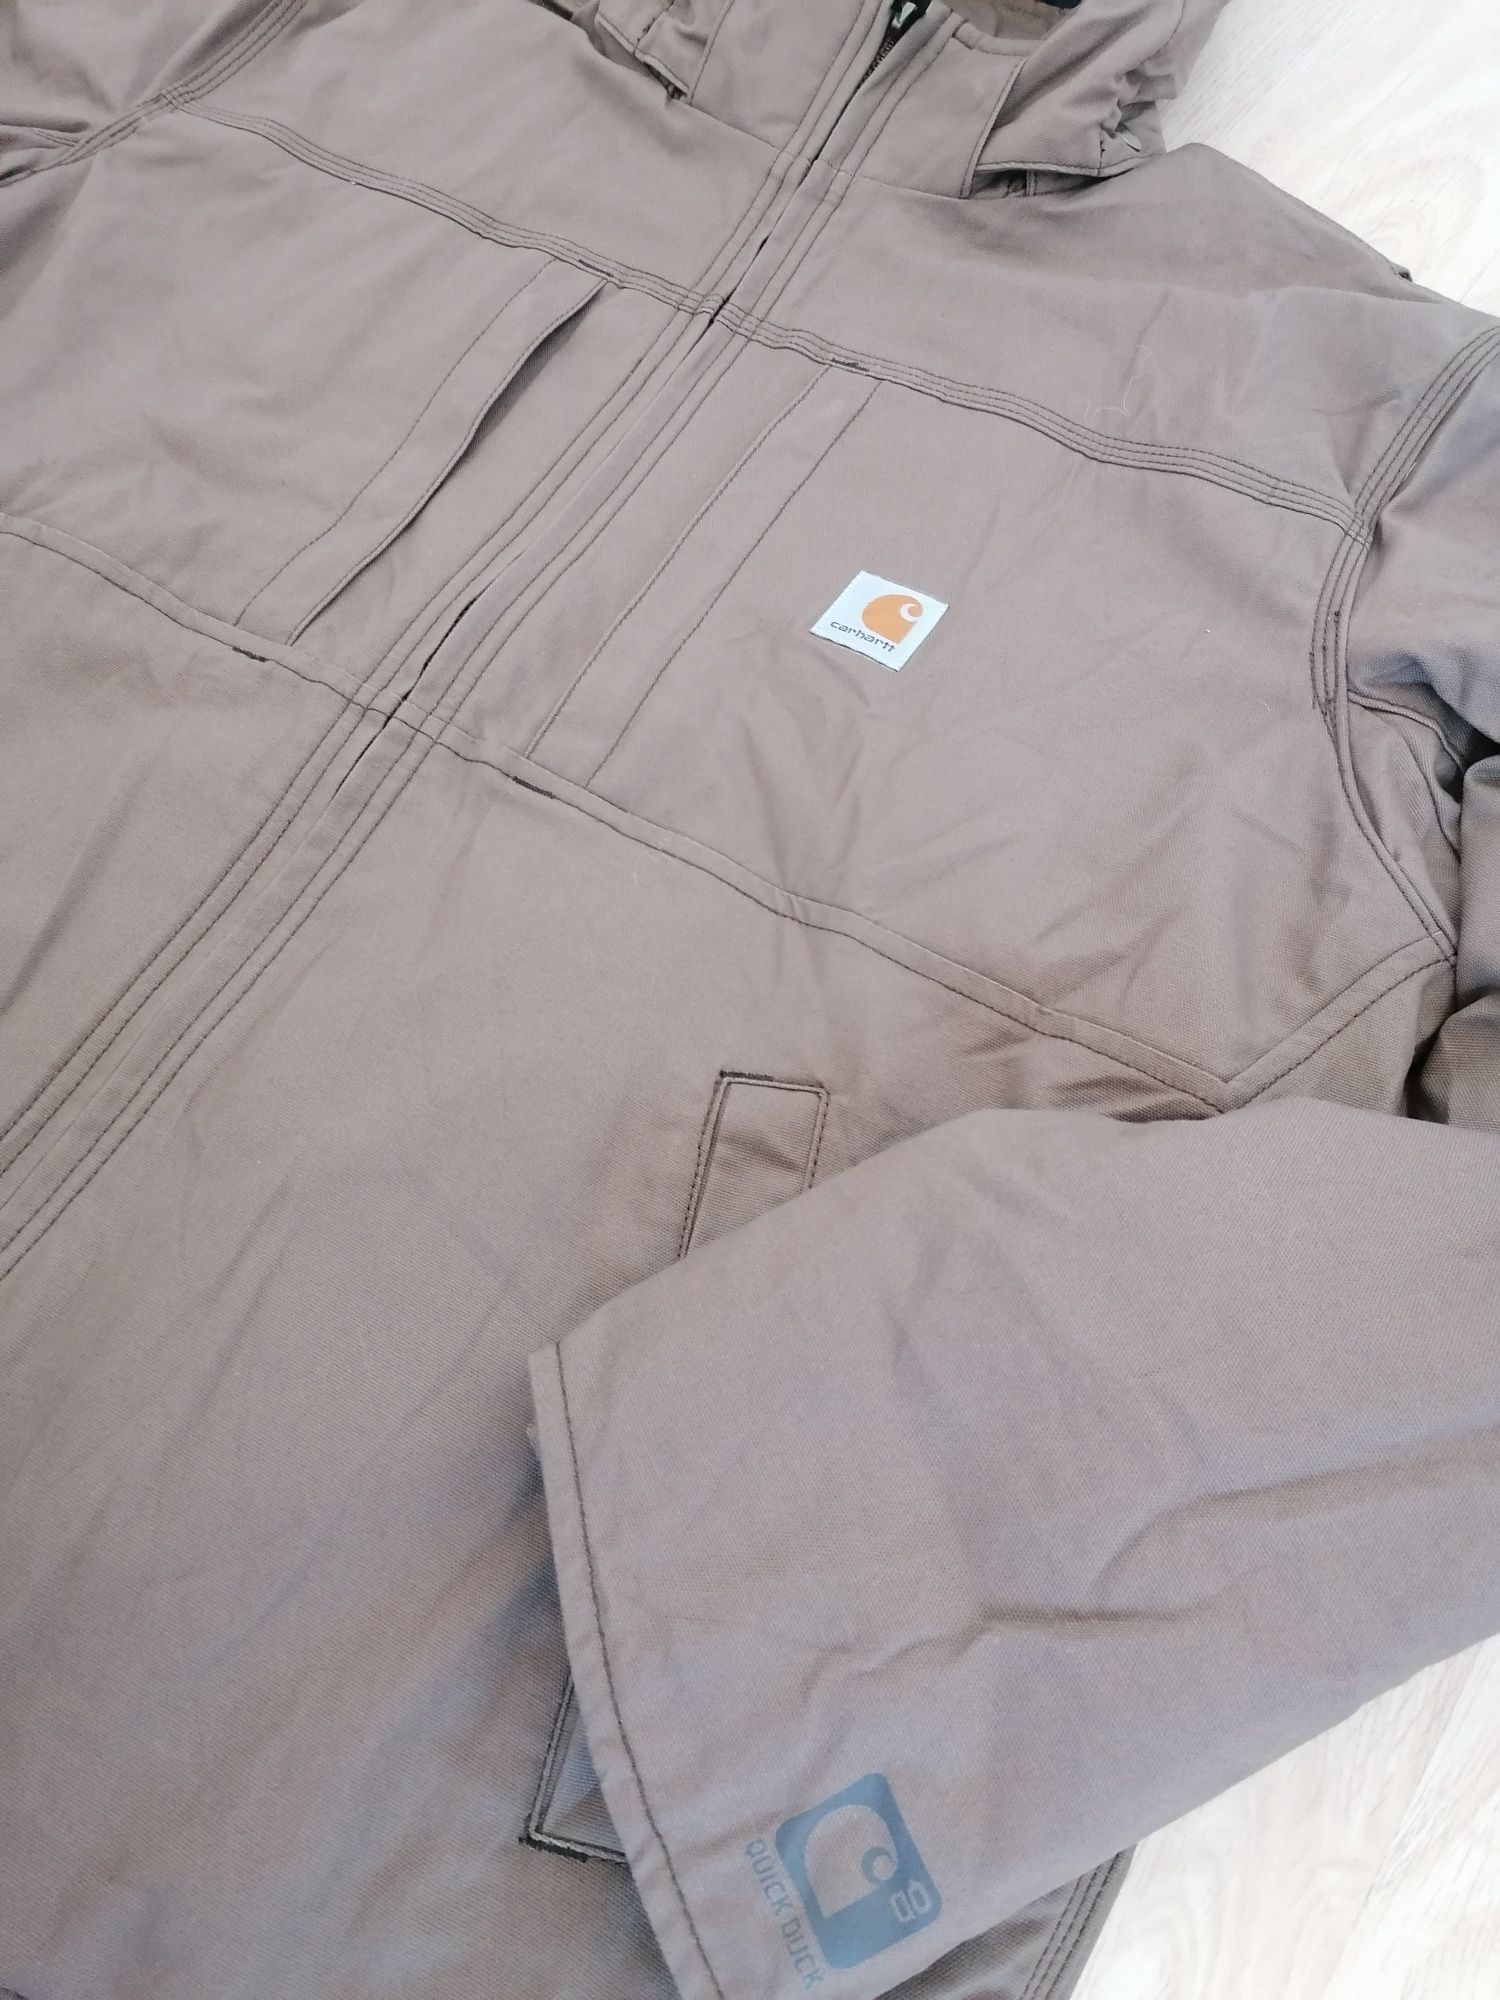 Carhartt full swing cryder loose fit quick duck